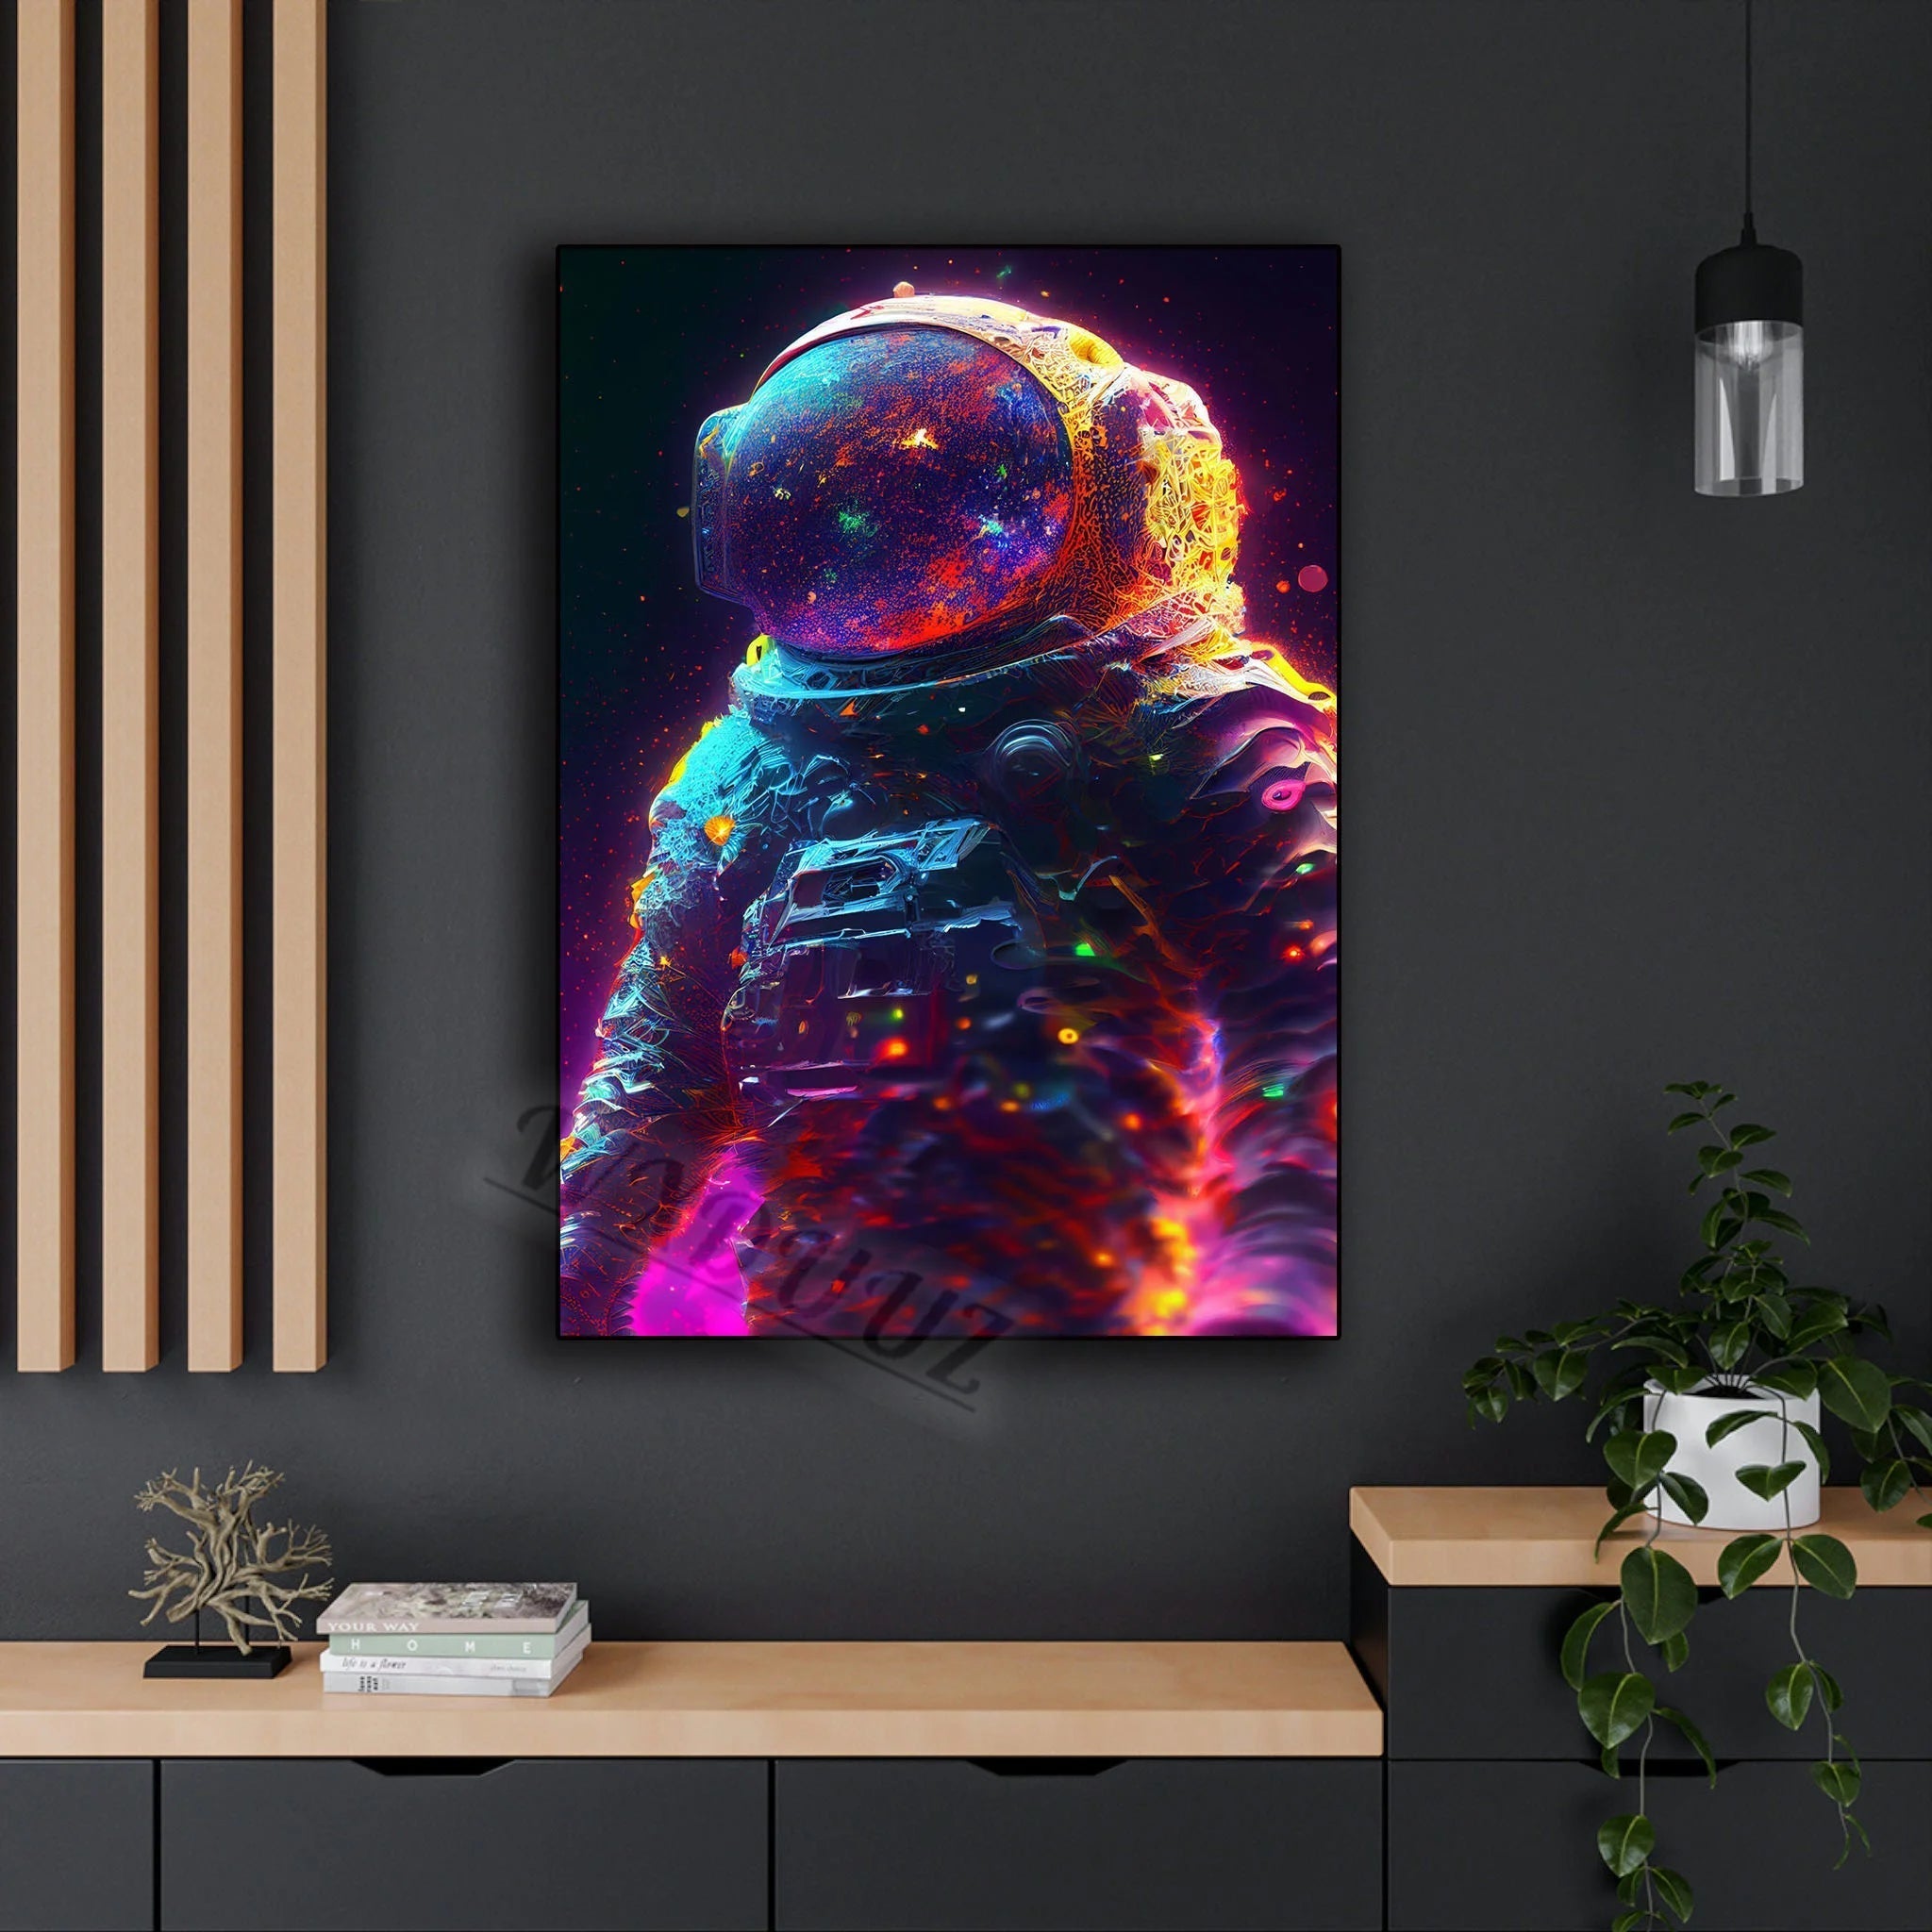 Space Astronaut Cyberpunk Nordic Game Watercolor Art F / 20x30cm No Framed